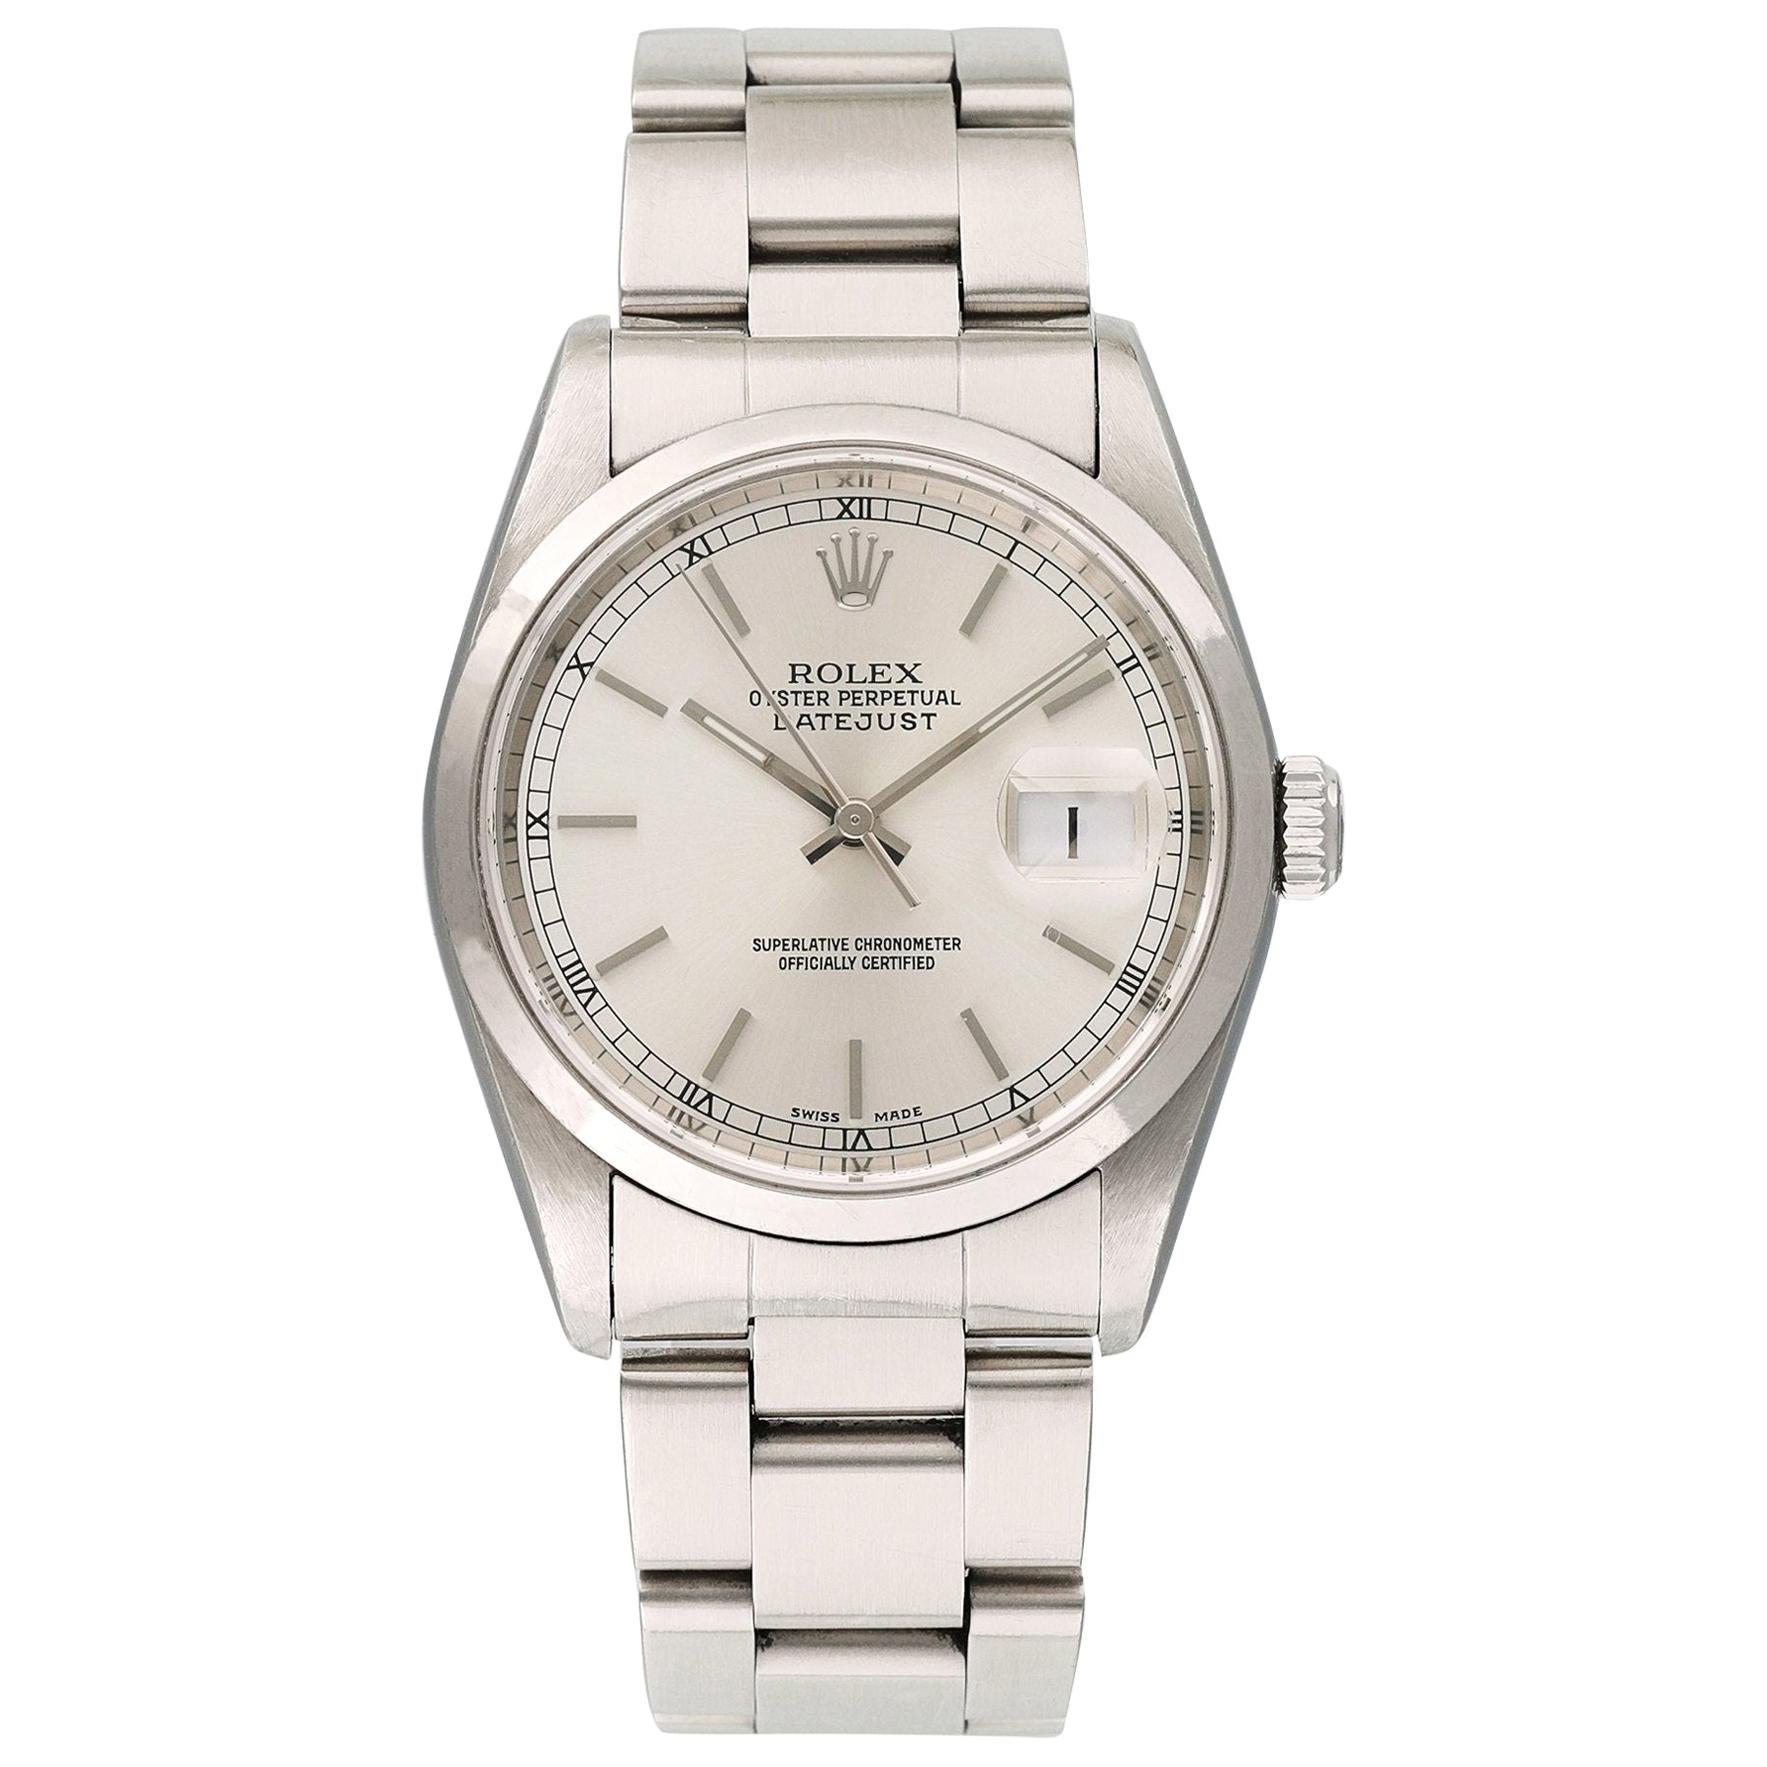 Rolex Oyster Perpetual Datejust 16200 Men’s Watch For Sale